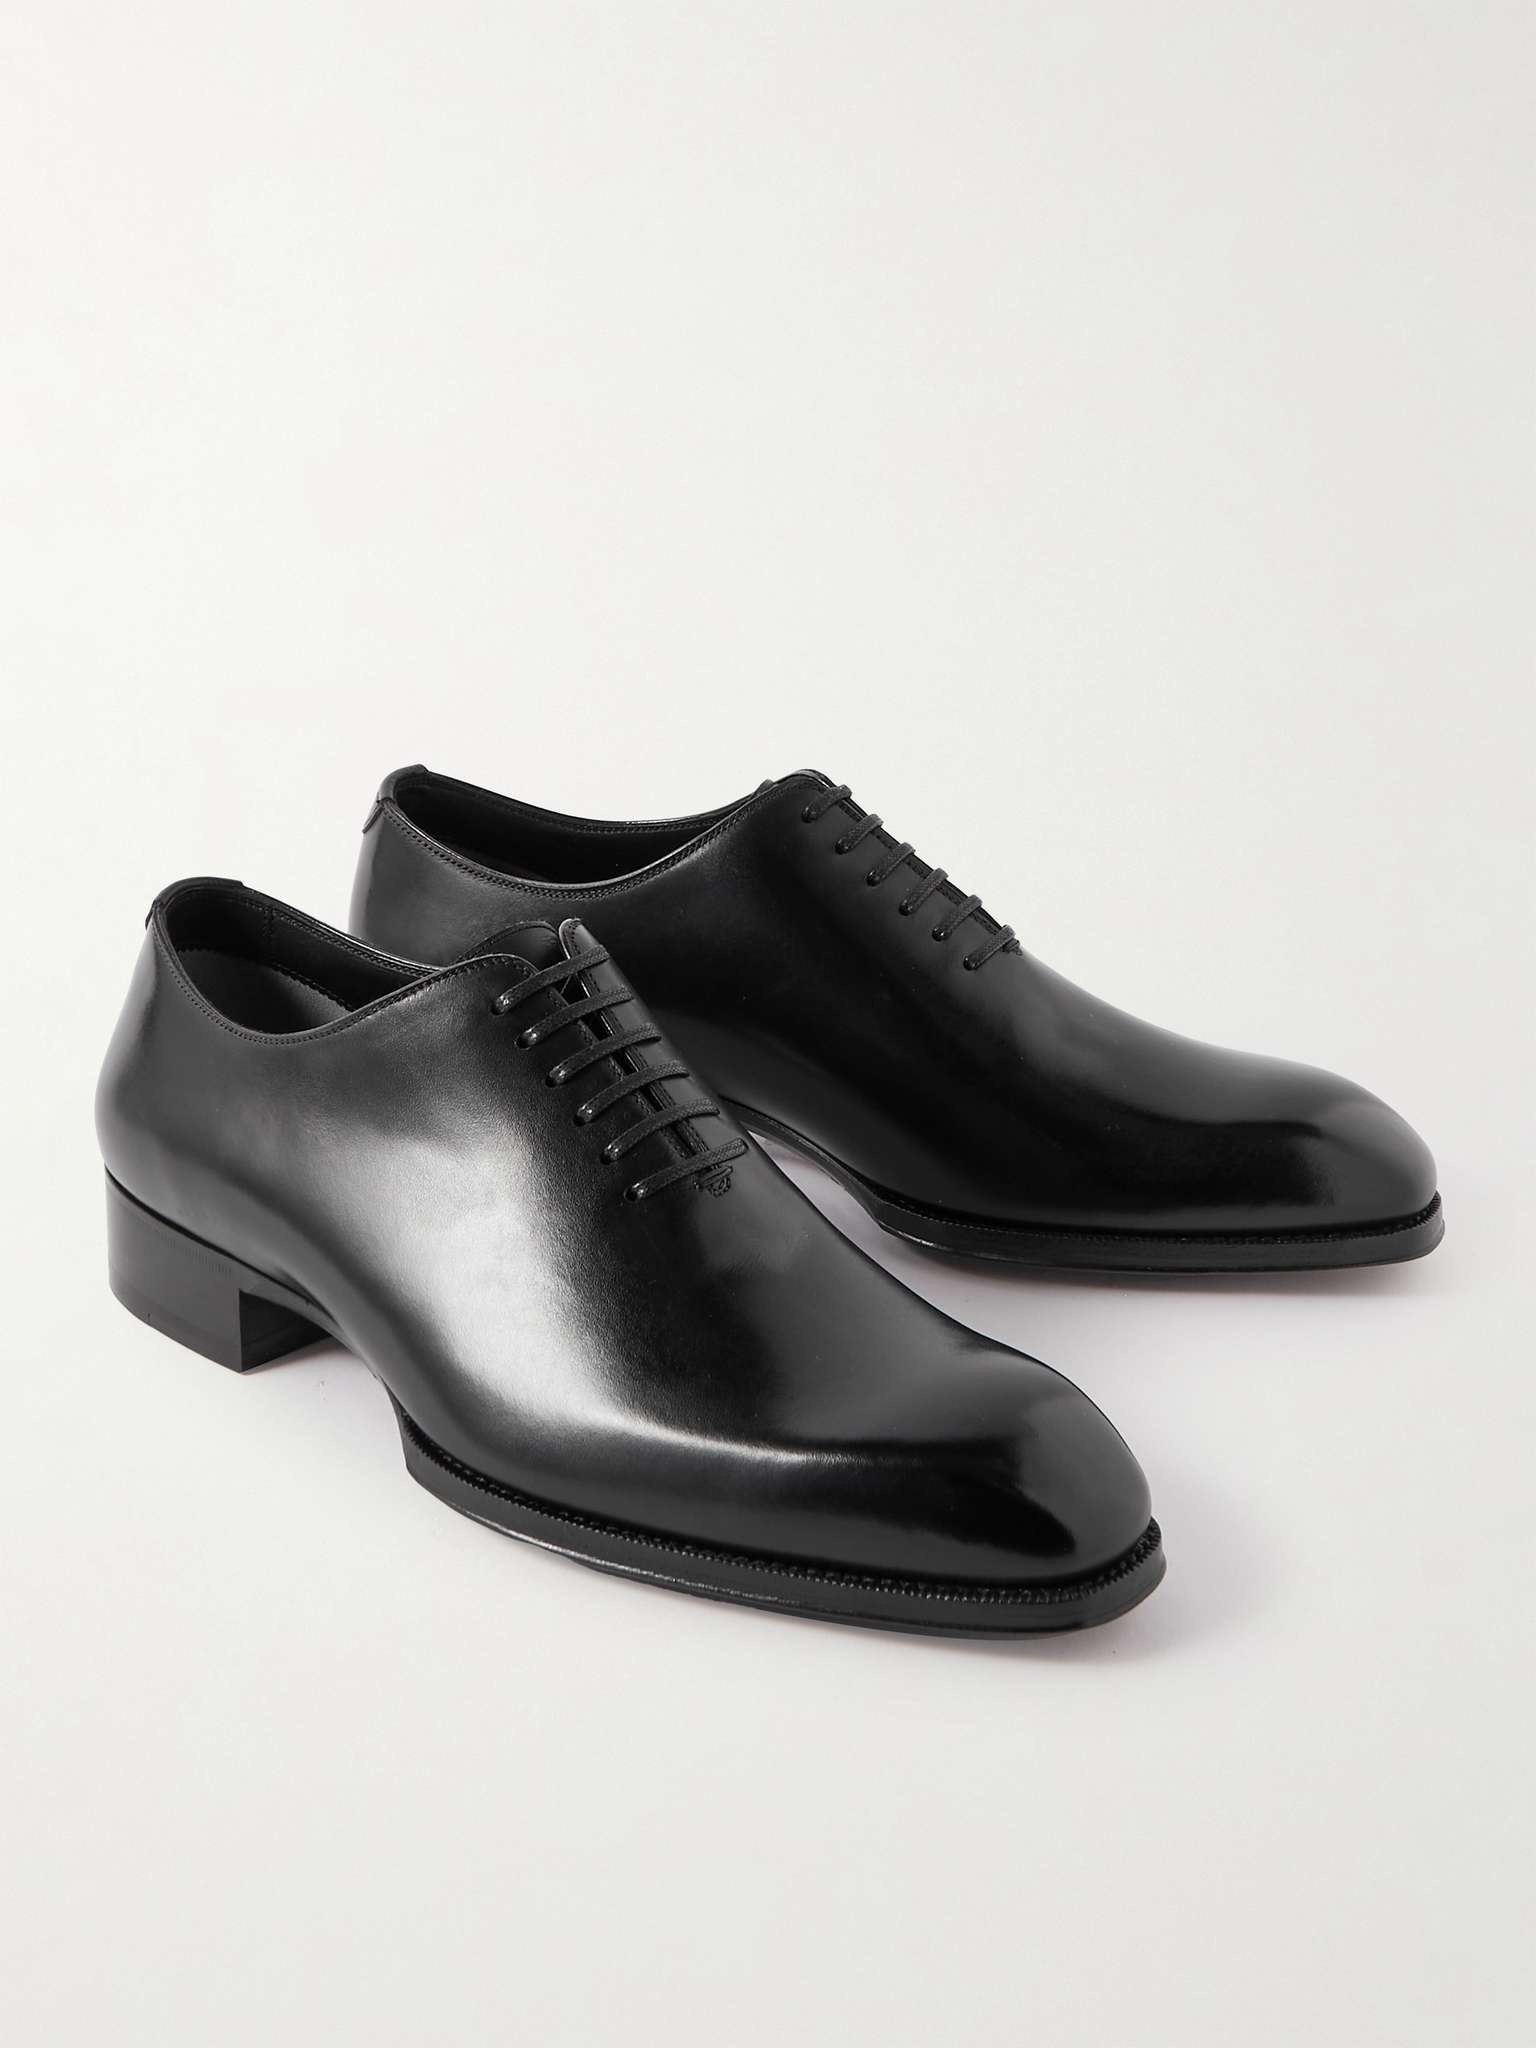 Elkan Whole-Cut Glossed-Leather Oxford Shoes - 4